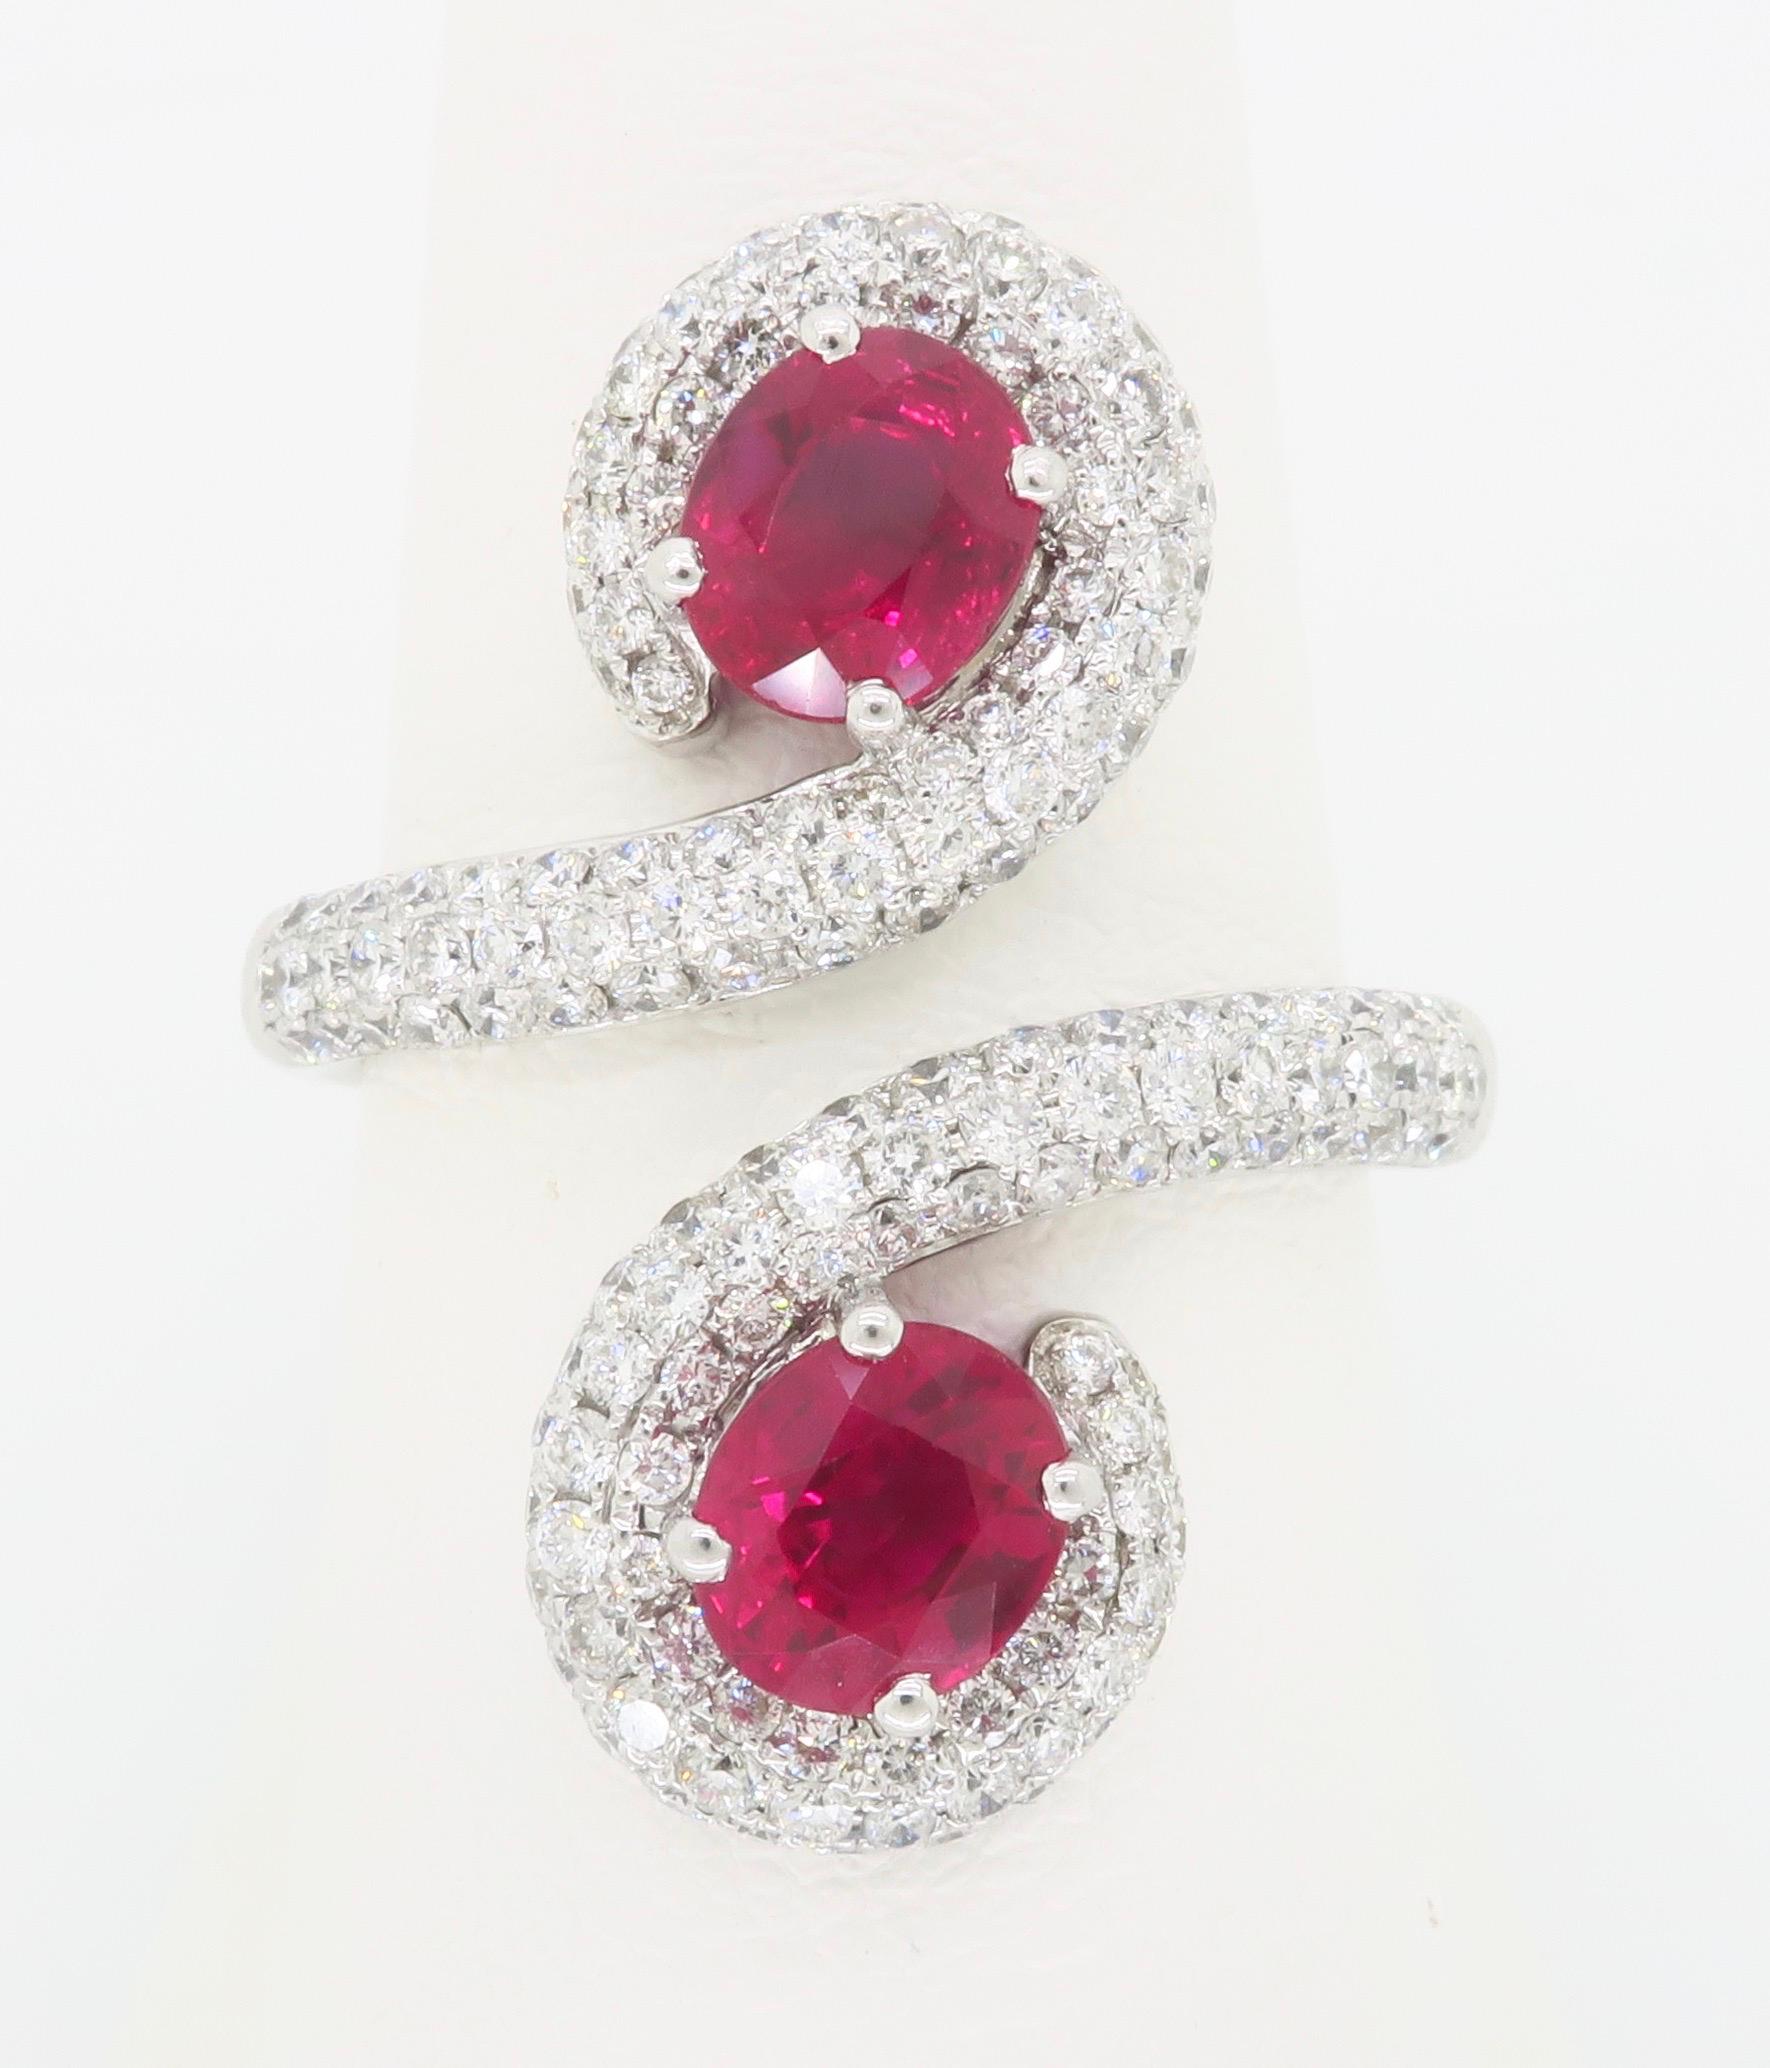 GIA certified natural Ruby & Diamond bypass ring made in 18k white gold. 

Gemstone: Natural Ruby & Diamond
Ruby Carat Weight: Approximately .95ct & .97ct 
Total Ruby Weight: Approximately 1.92
GIA Certification number: 2225600166
Diamond Carat